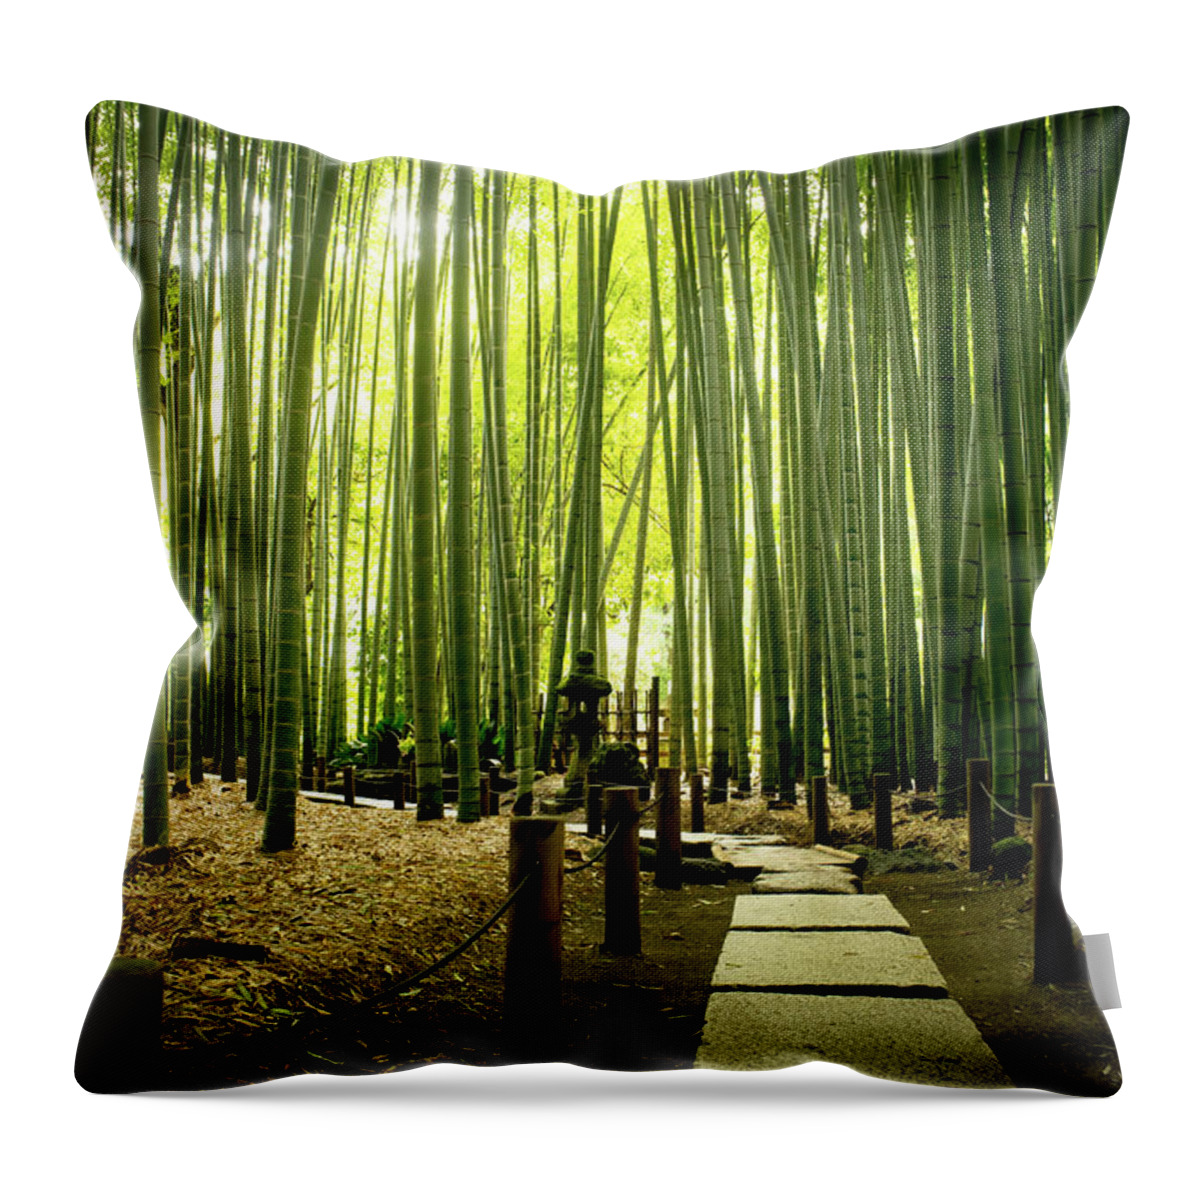 Tranquility Throw Pillow featuring the photograph Bamboo Grove At Houkoku-ji Temple by Marser